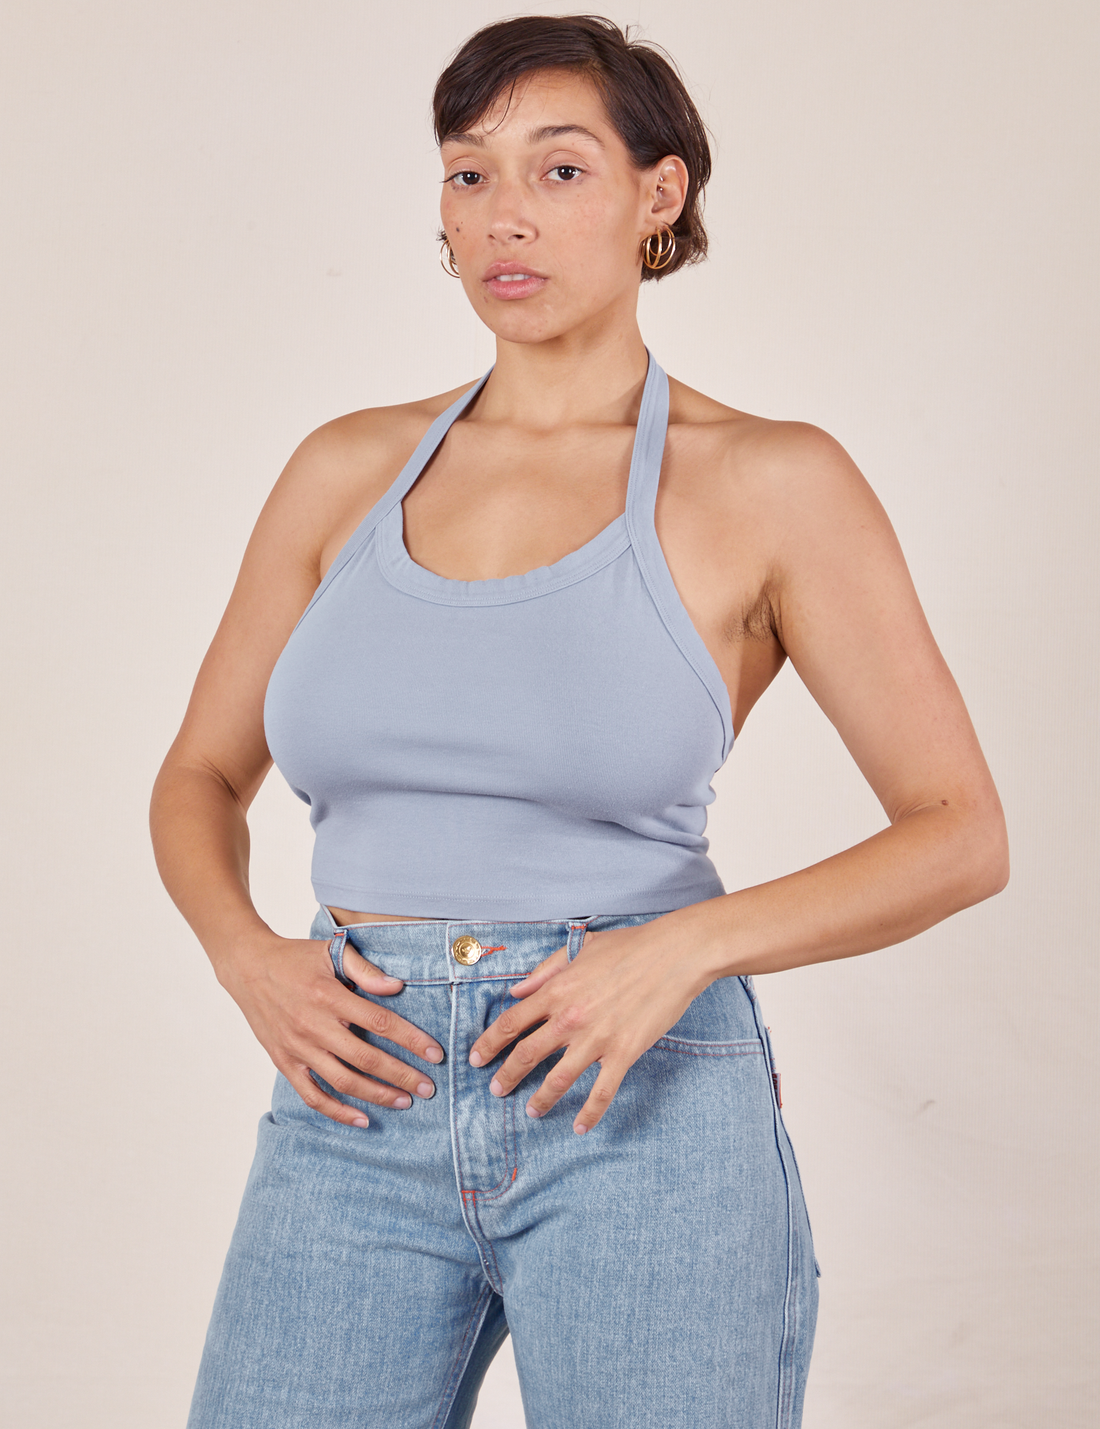 Tiara is wearing Halter Top in Periwinkle and light wash Sailor Jeans